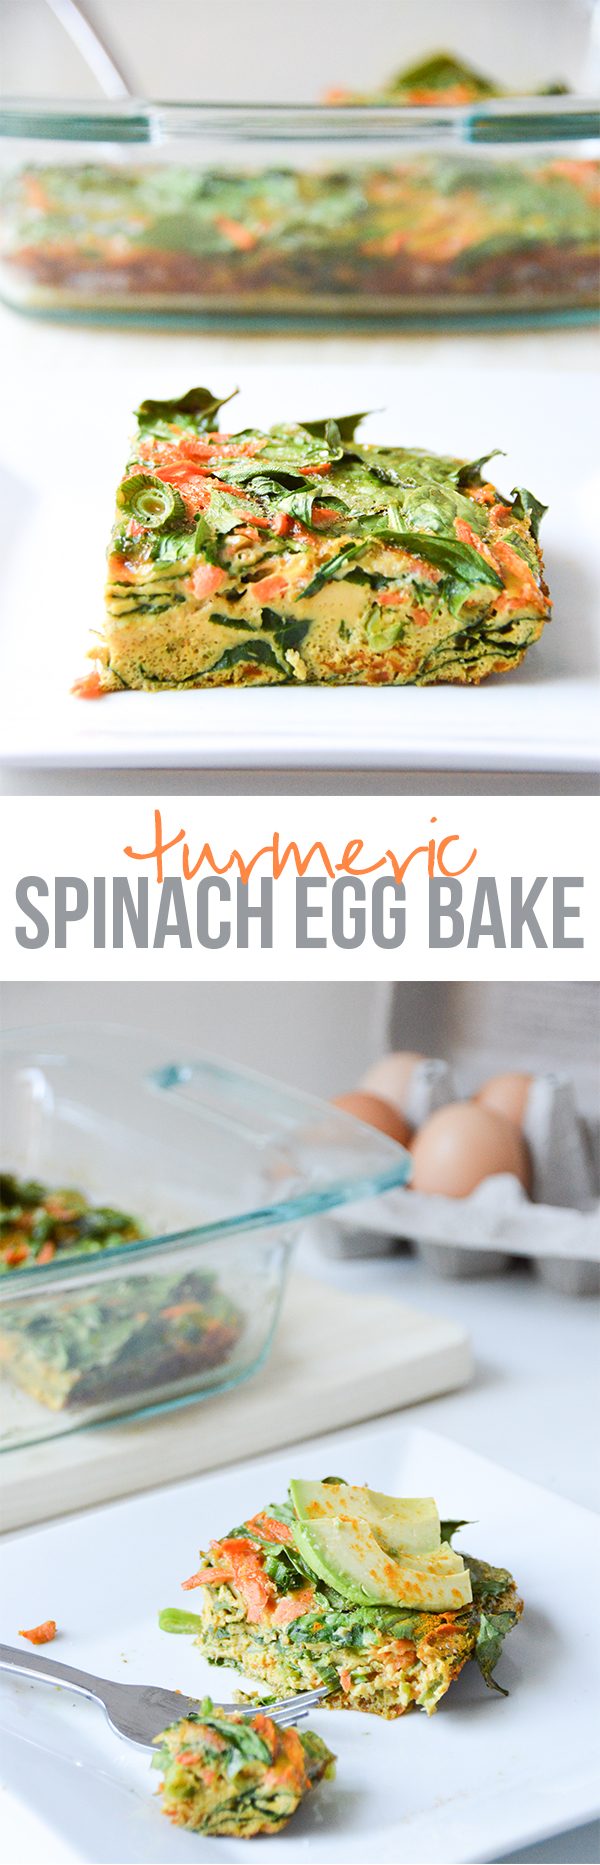 This turmeric egg bake is packed with spinach and shredded sweet potatoes for an easy, flavorful make-ahead breakfast.